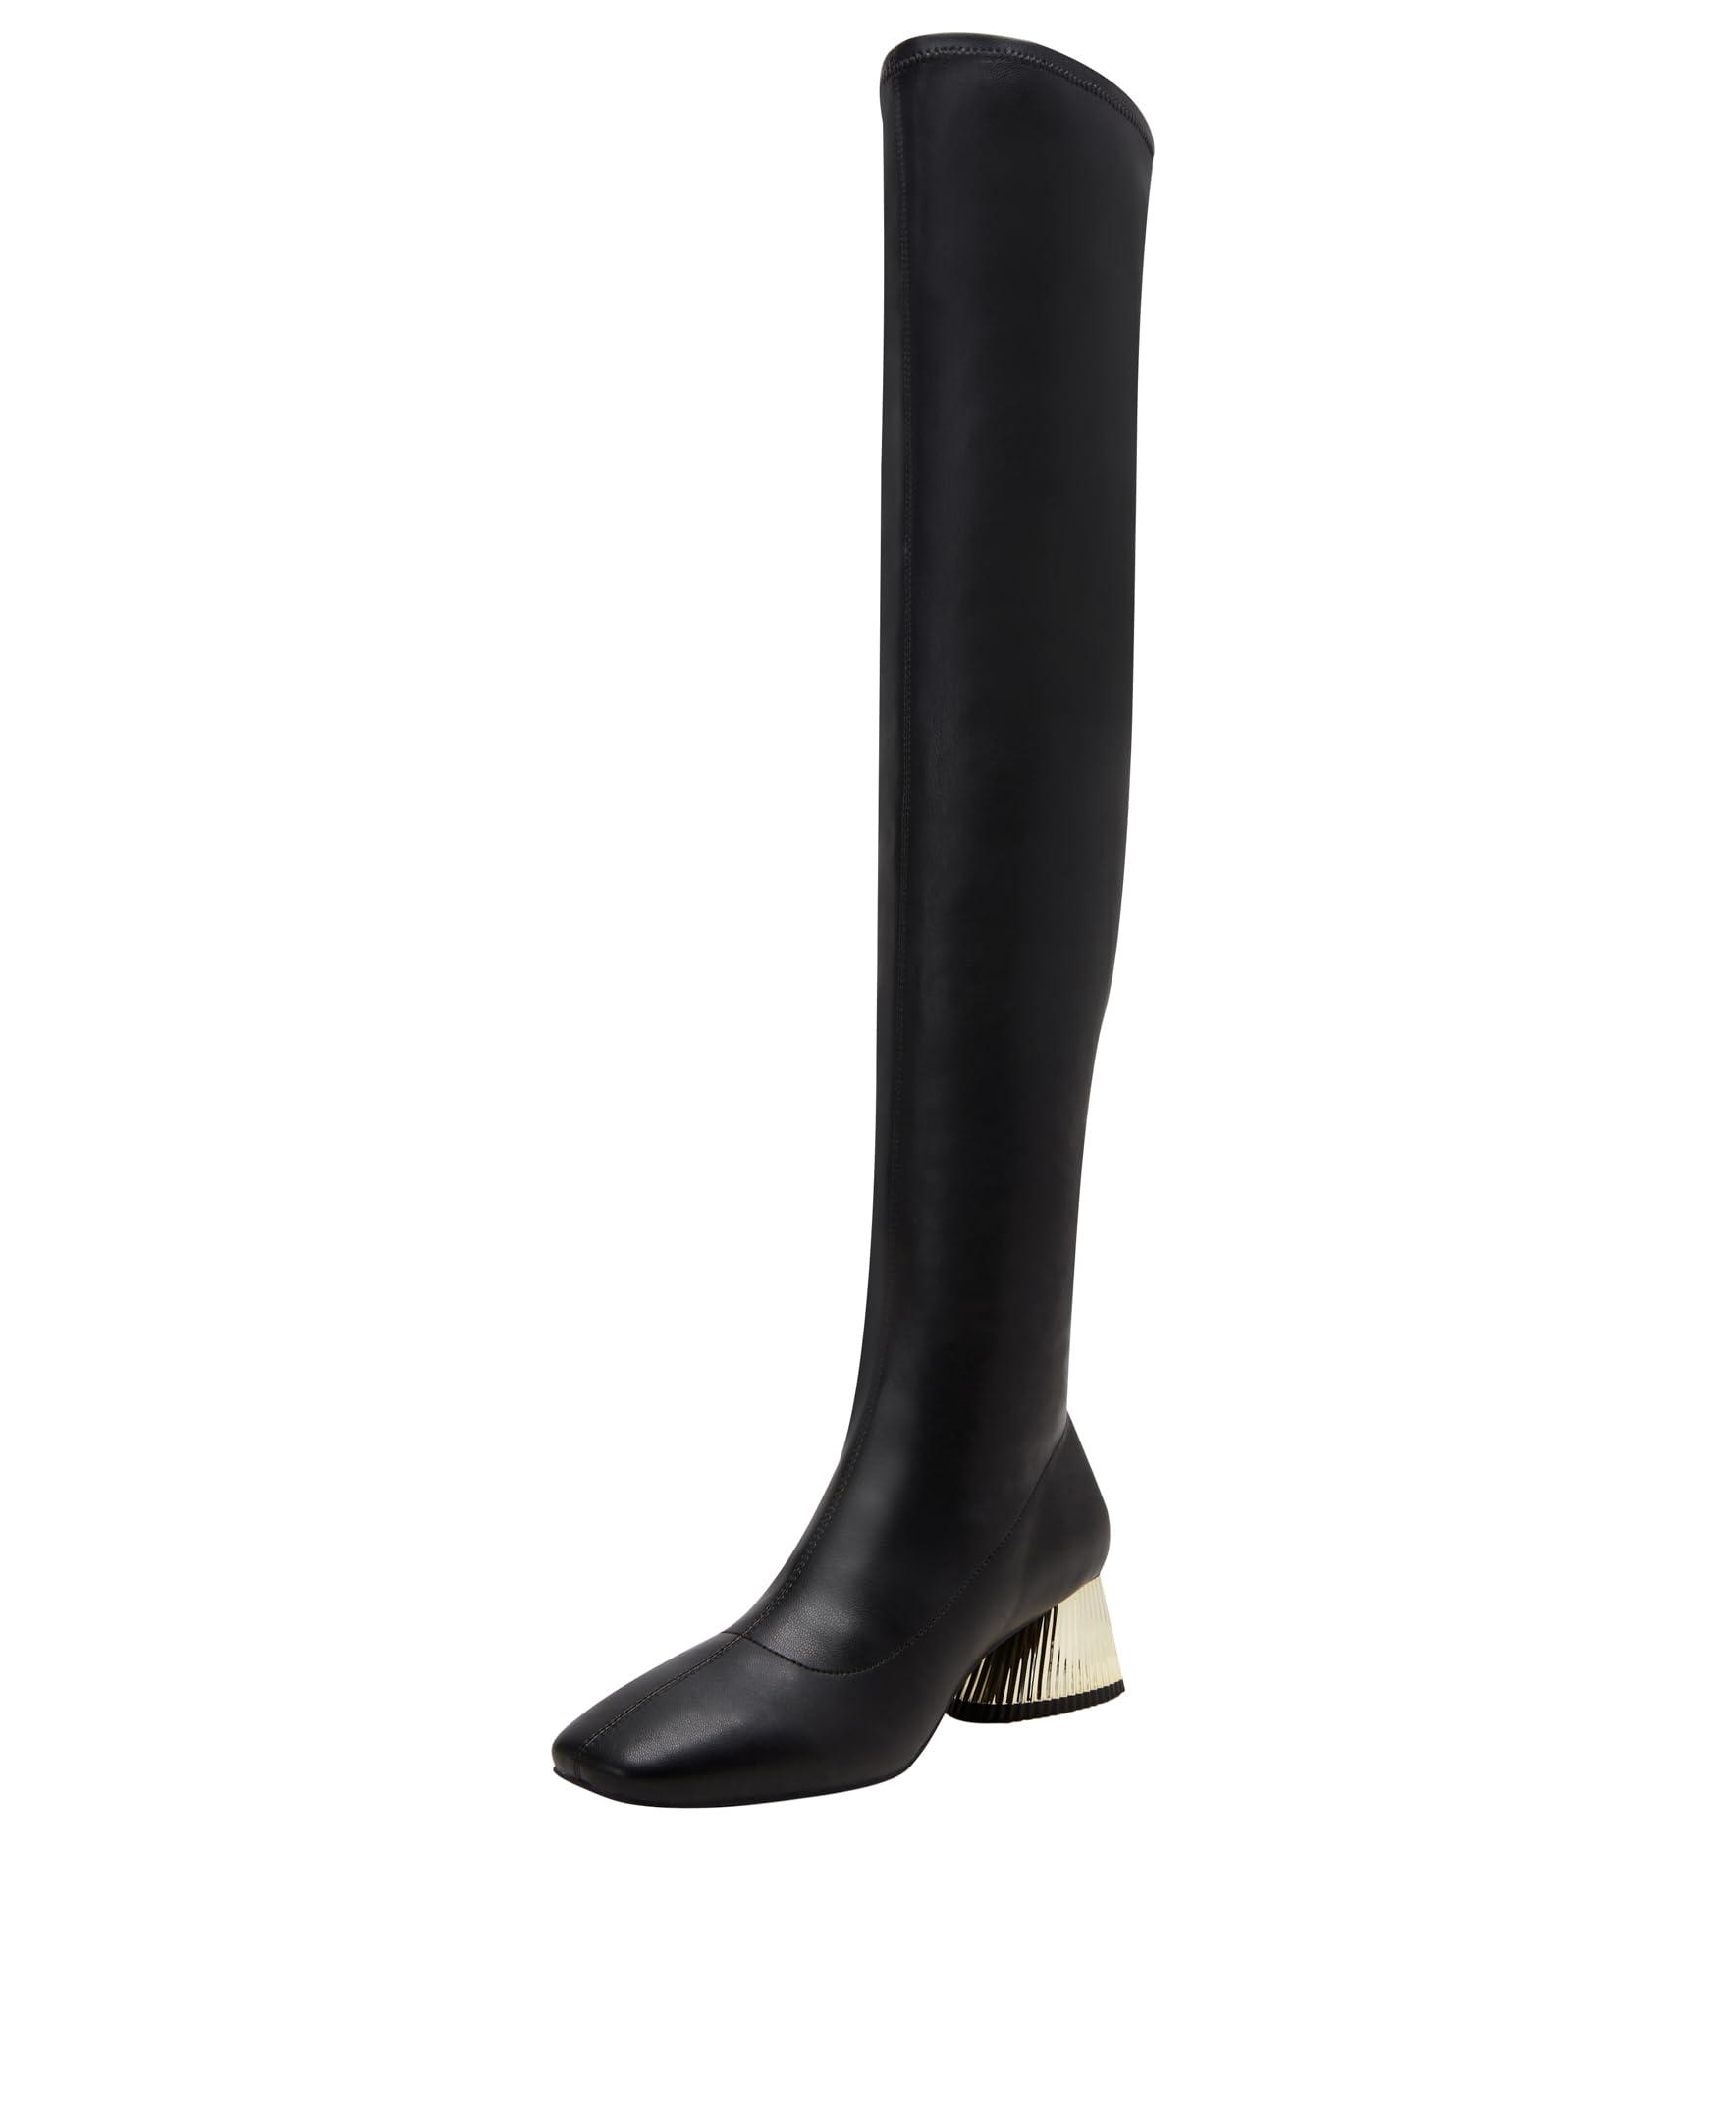 Katy Perry The Clarra Otk Boot Over-the-knee in Black | Lyst